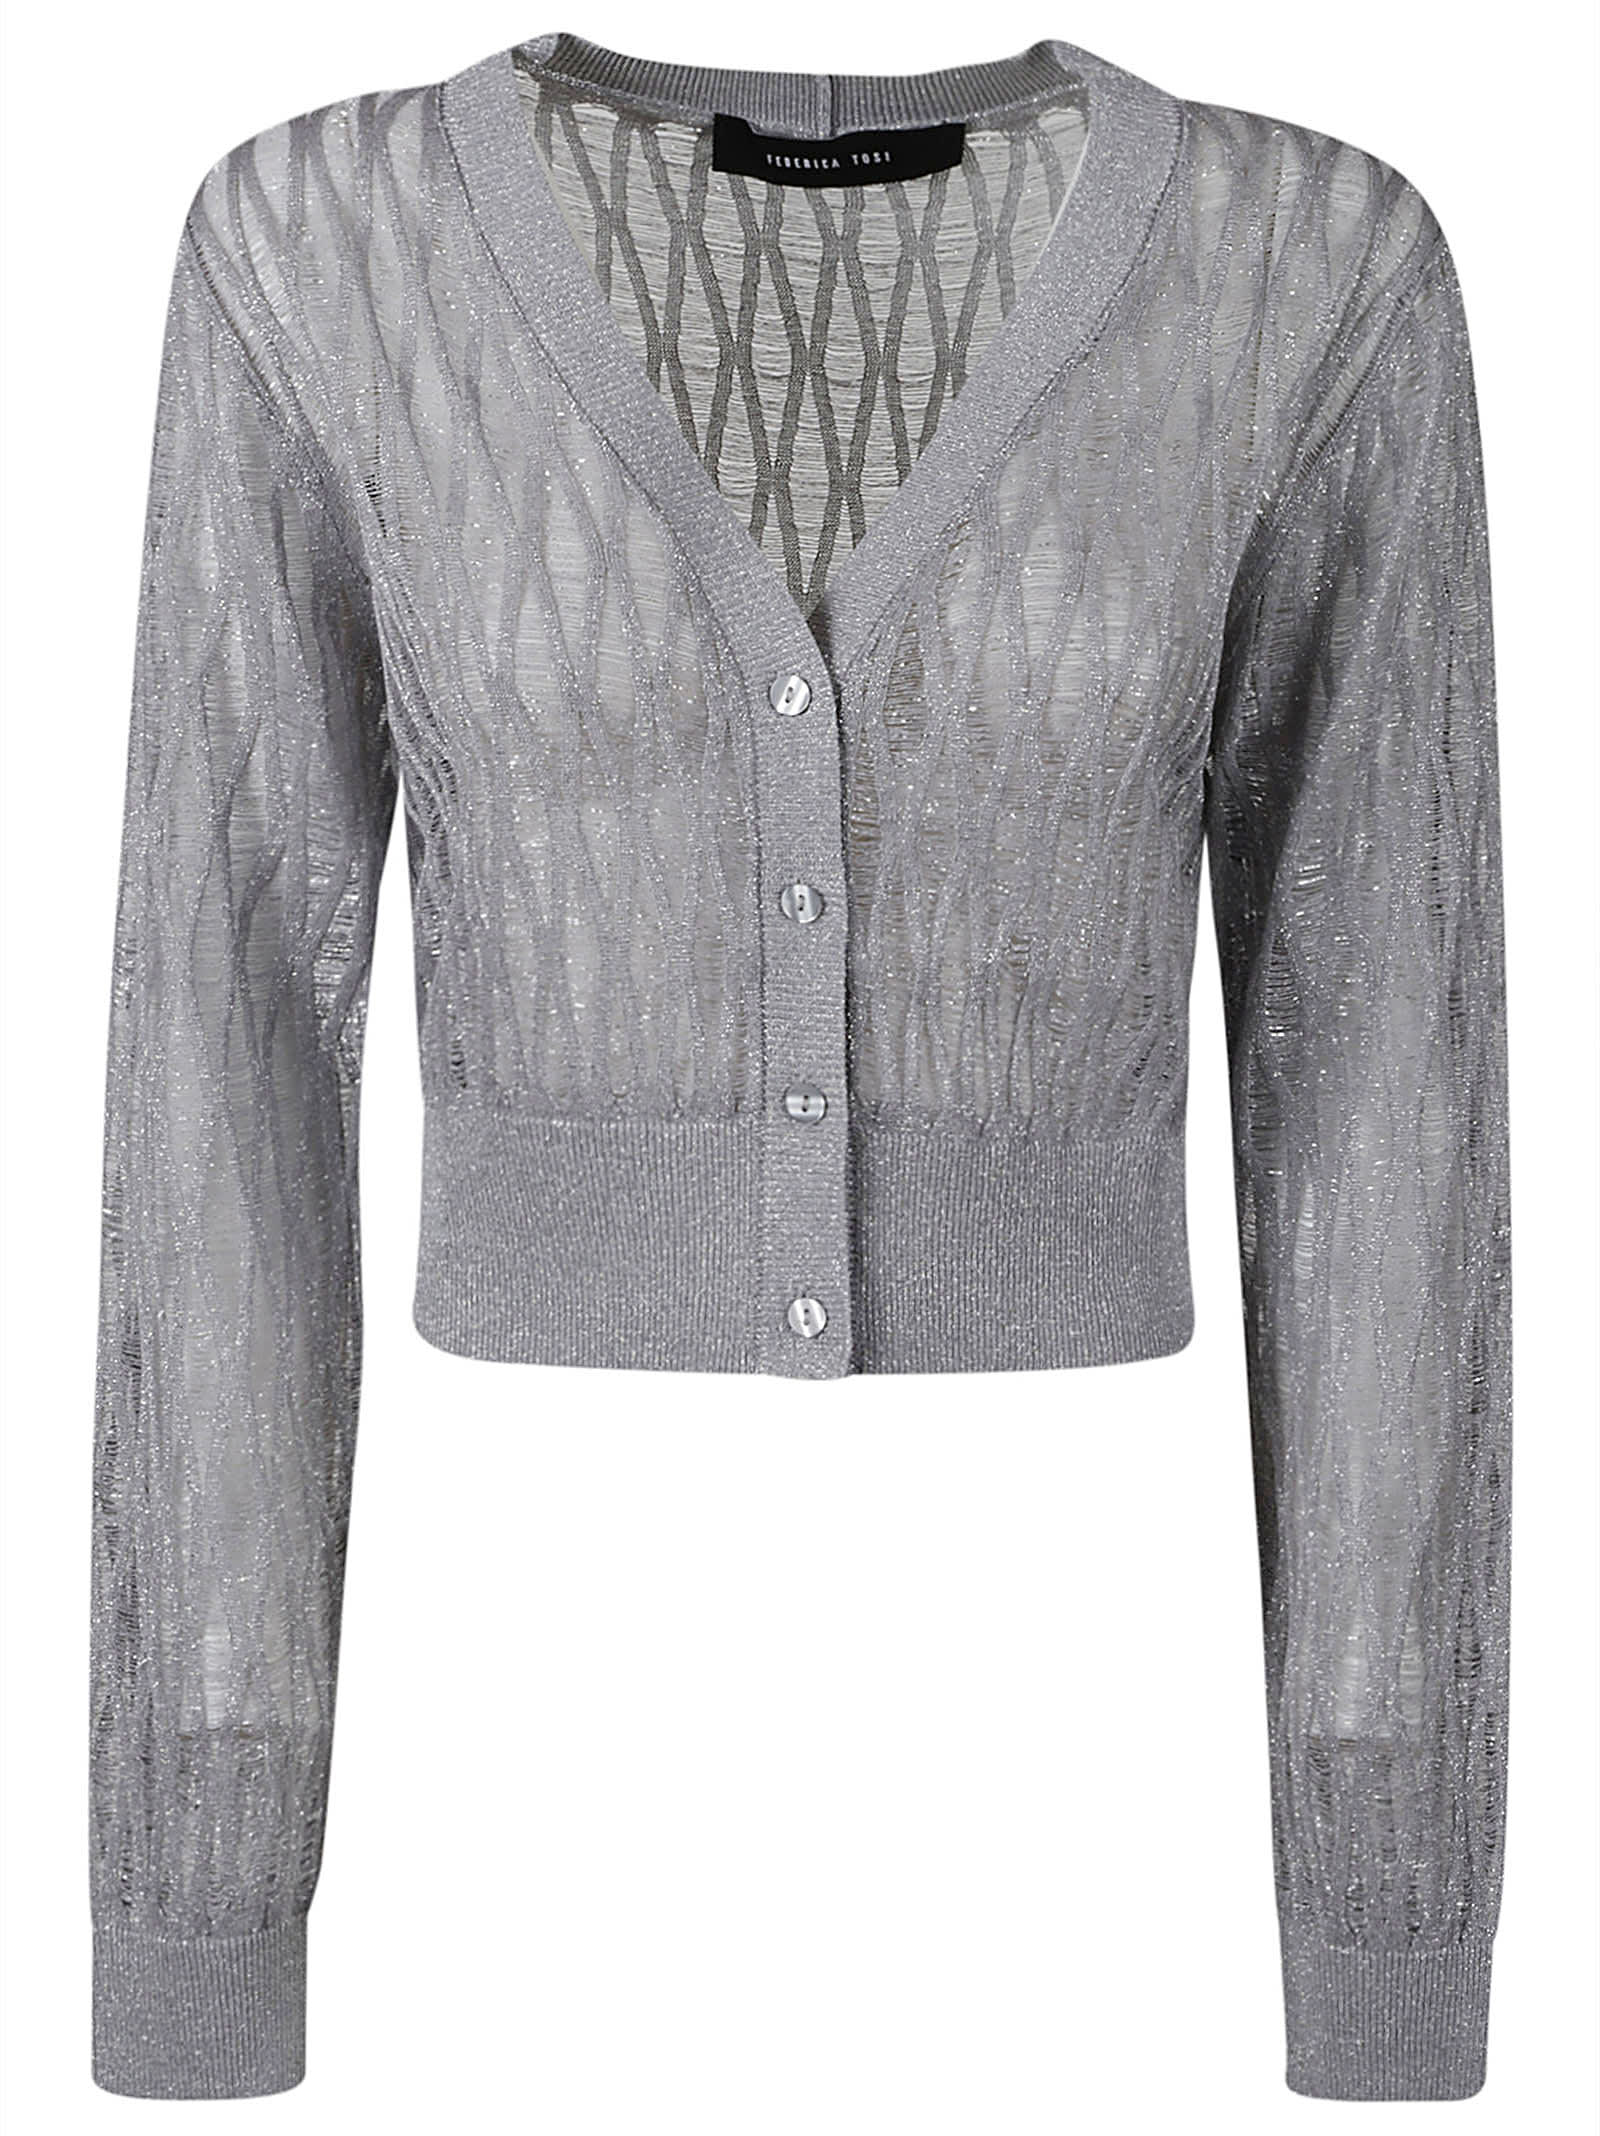 Shop Federica Tosi See-through Diamond Pattern Cropped Cardigan In Silver